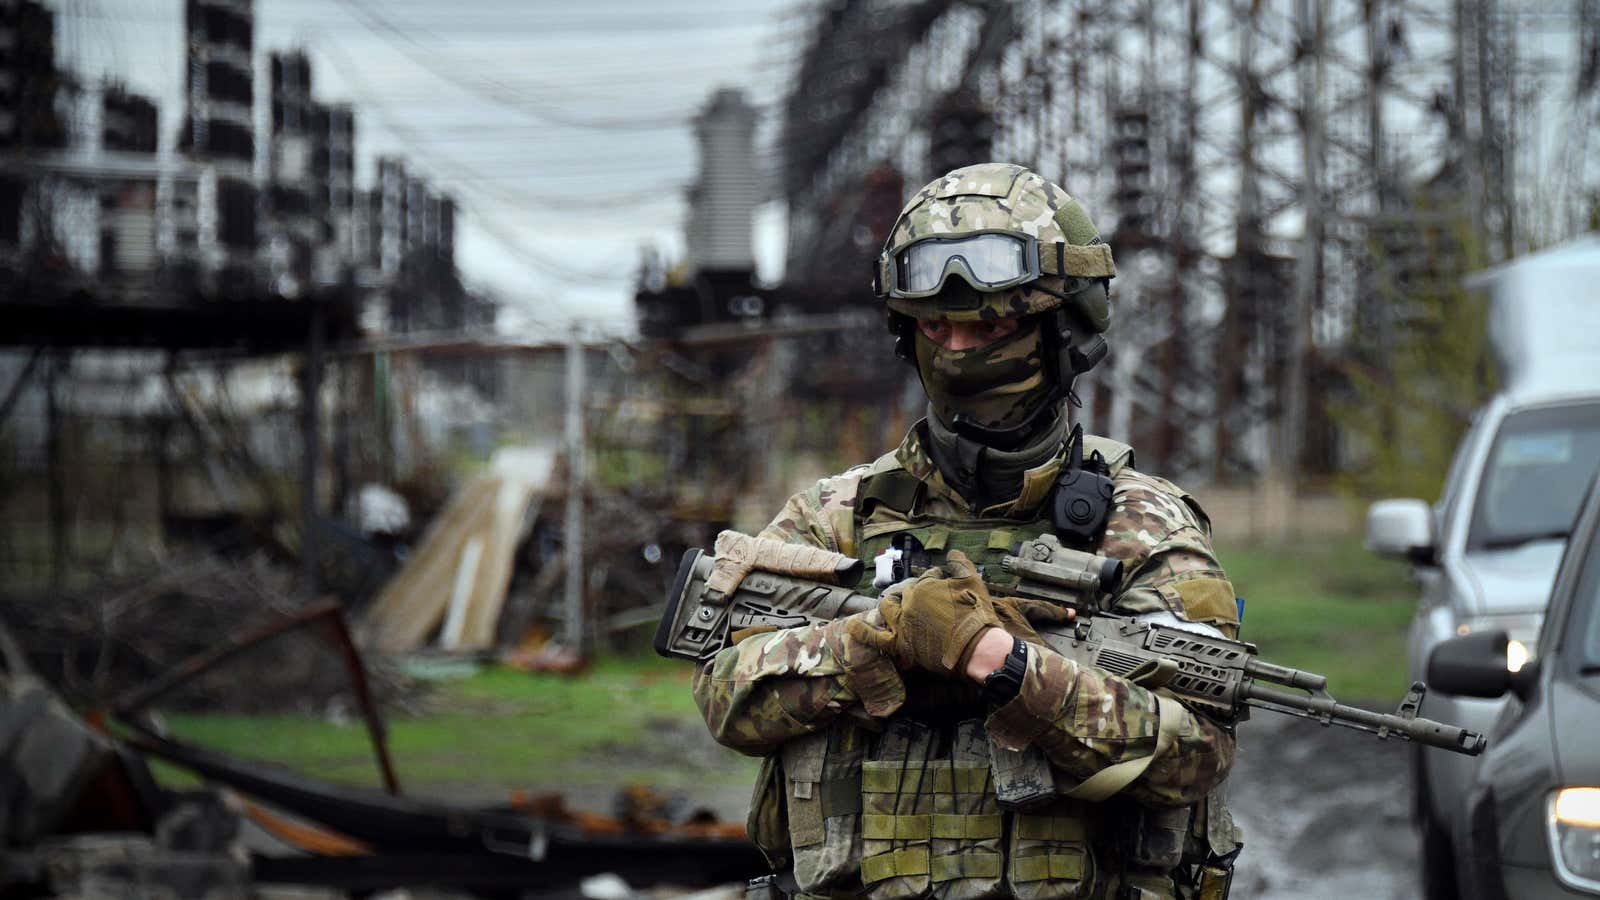 In this picture taken on April 13, 2022, a Russian soldier stands guard at the Luhansk power plant in the town of Shchastya. (Photo by Alexander NEMENOV / AFP) (Photo by ALEXANDER NEMENOV/AFP via Getty Images)